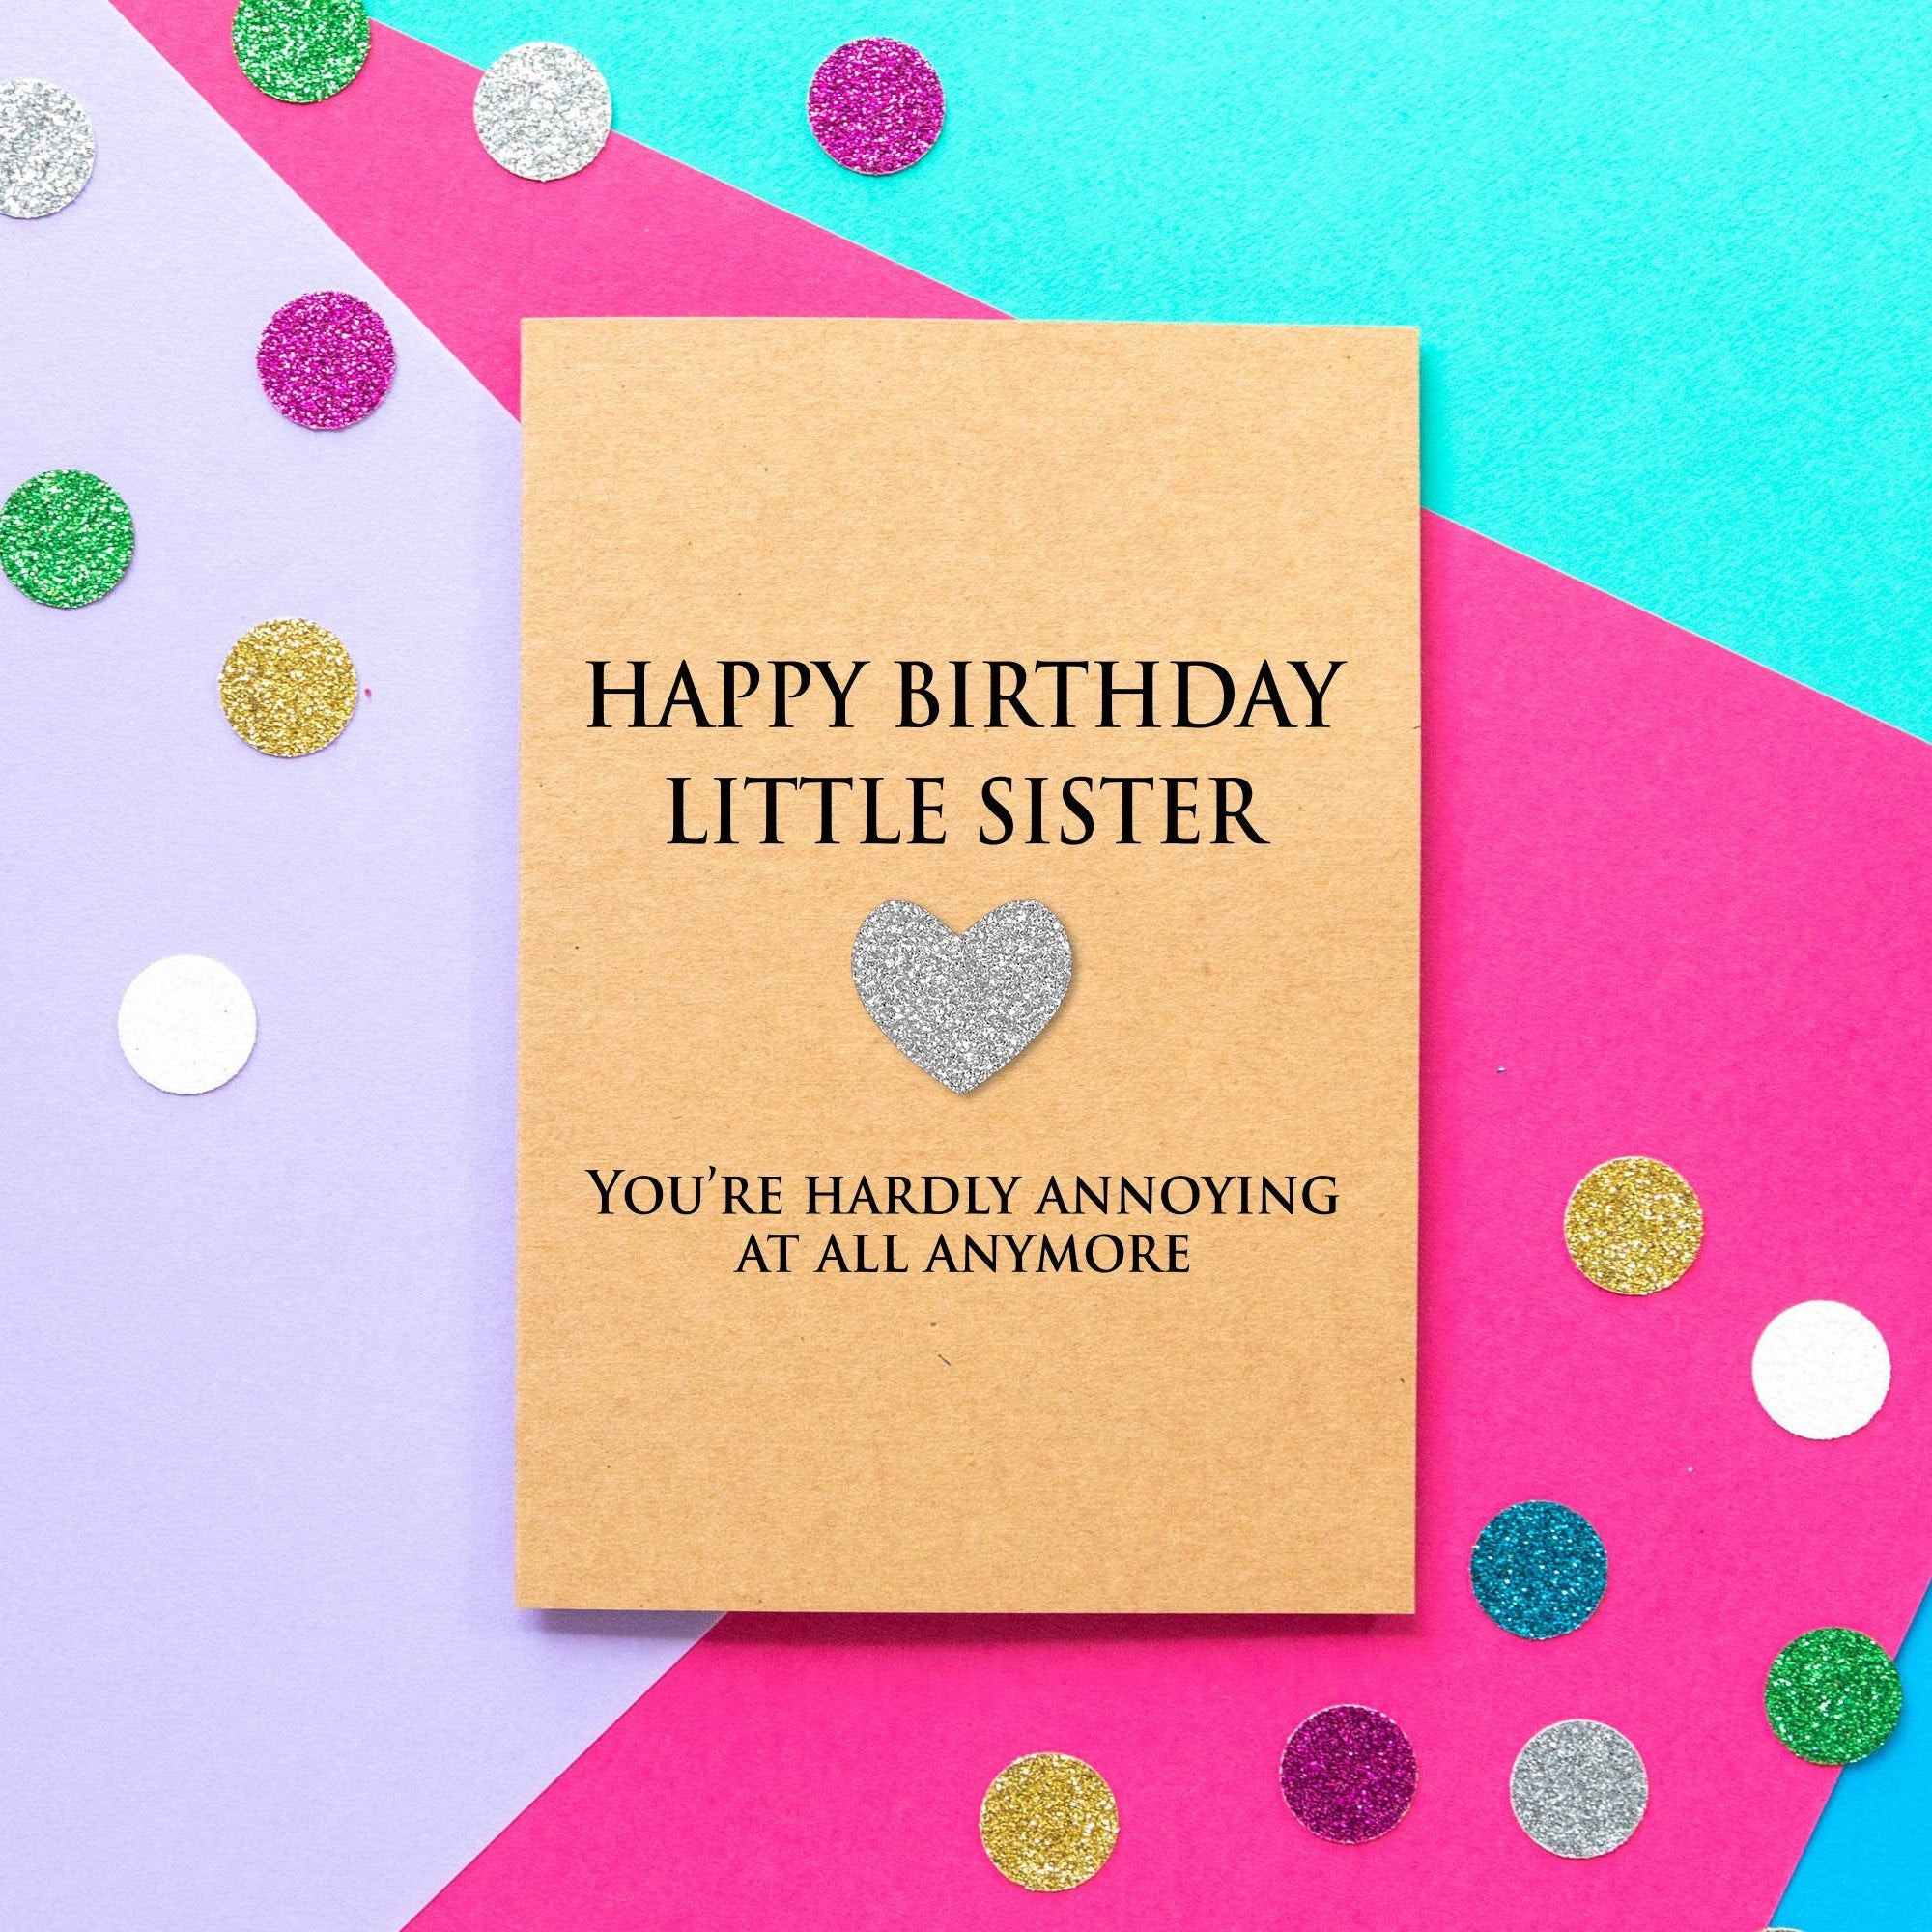 Birthday Cards For Sister Funny
 Funny Little Sister Birthday Card You re Hardly Annoying